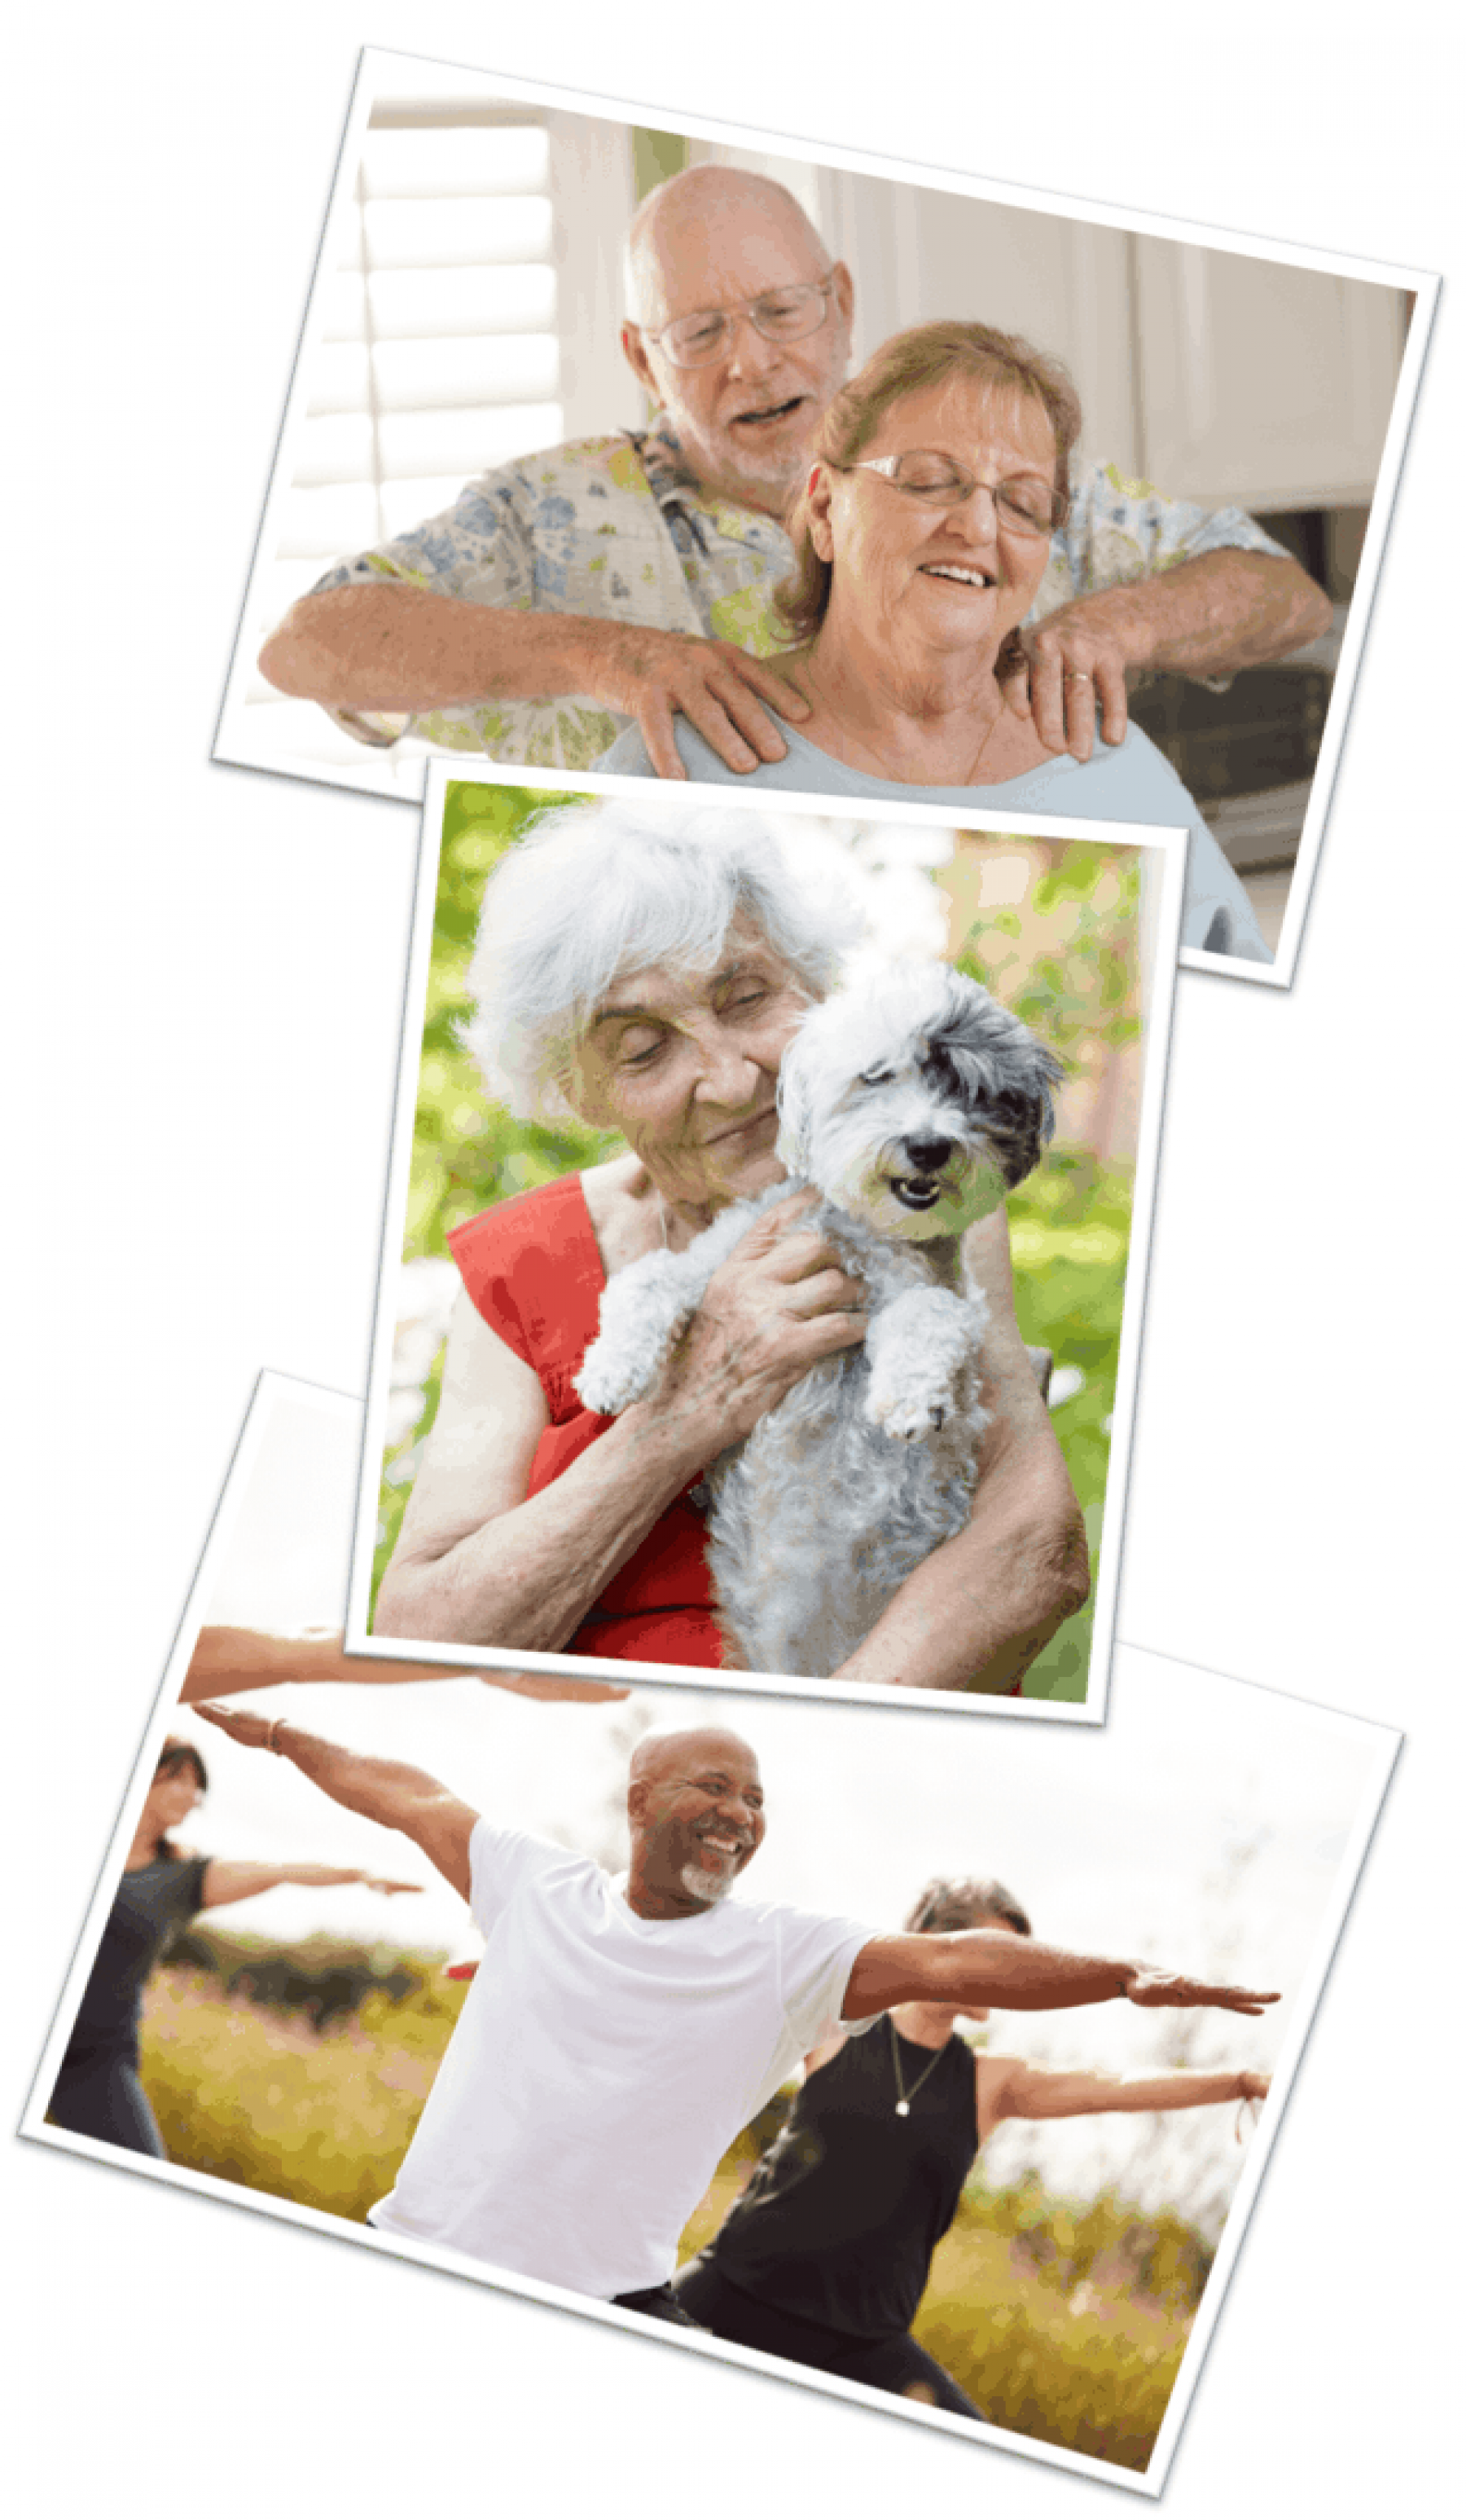 Photos of older adults engaging in yoga, massage, and holding a small dog.